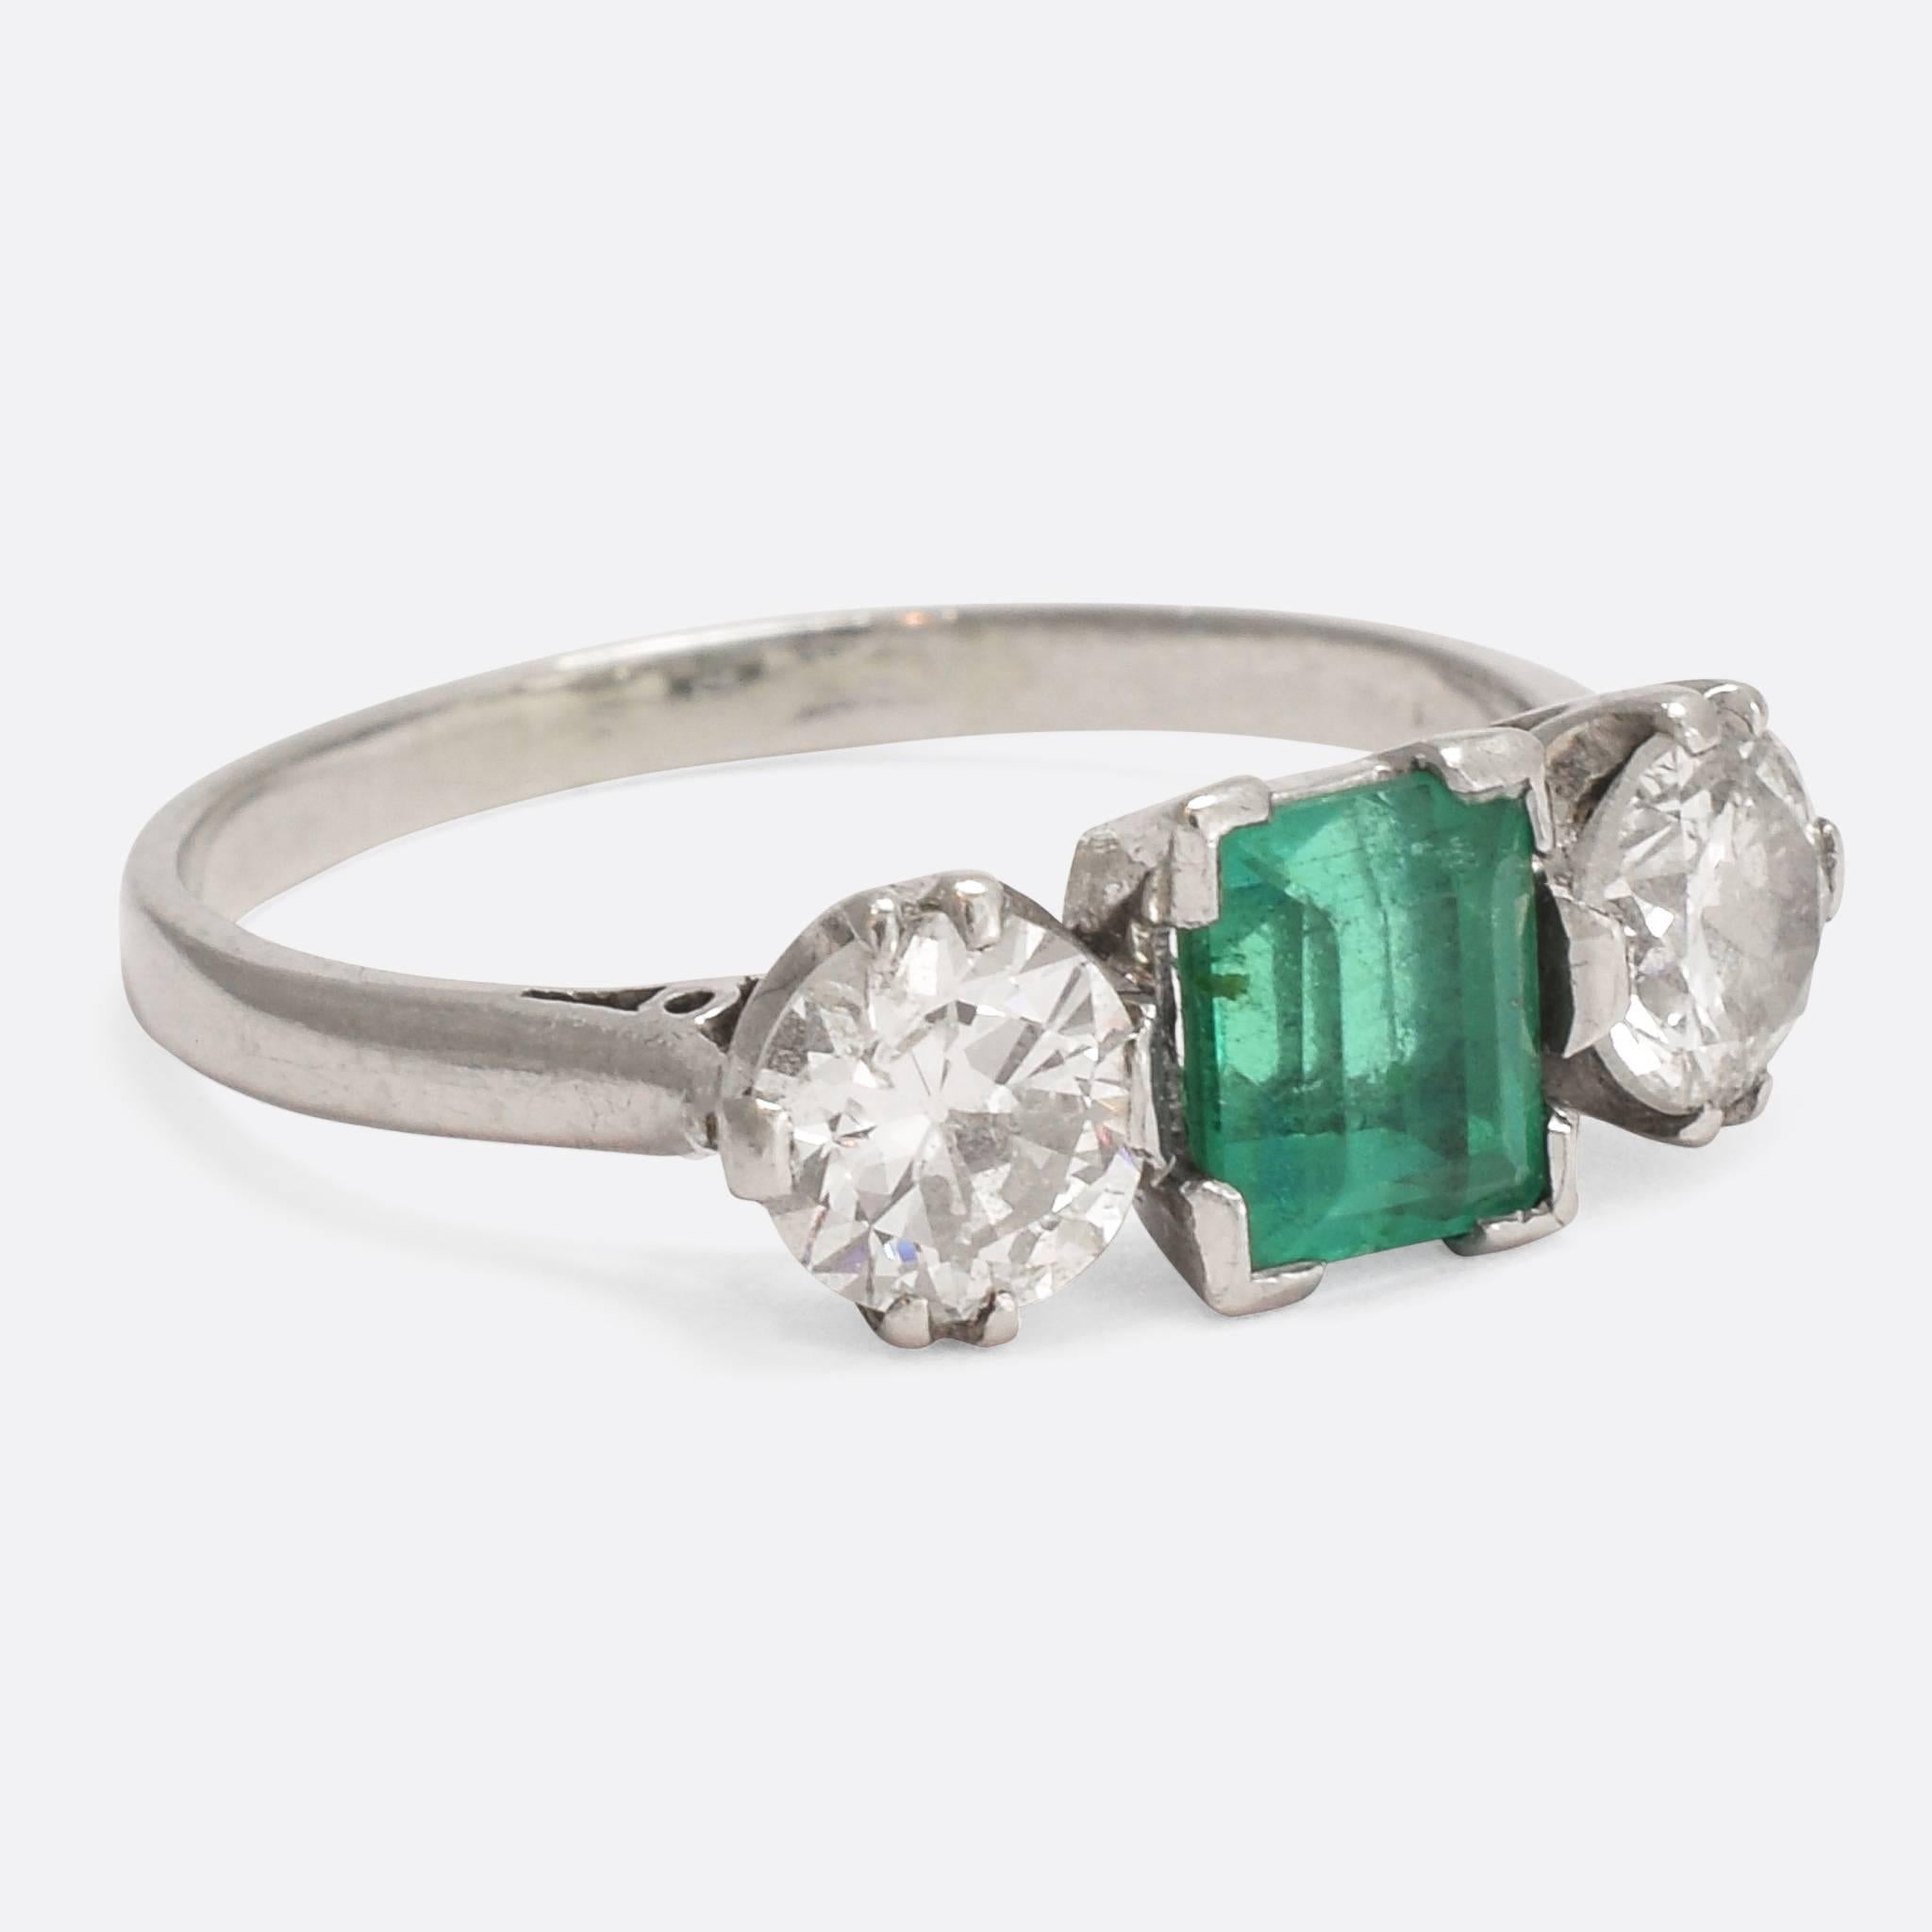 A mesmerising Art Deco era Emerald and Diamond trinity ring. The principal stone - held by four corner claws - displays excellent colour, and the two flanking transitional cut diamonds are bright and clean. An incredibly stylish 1920s take on the